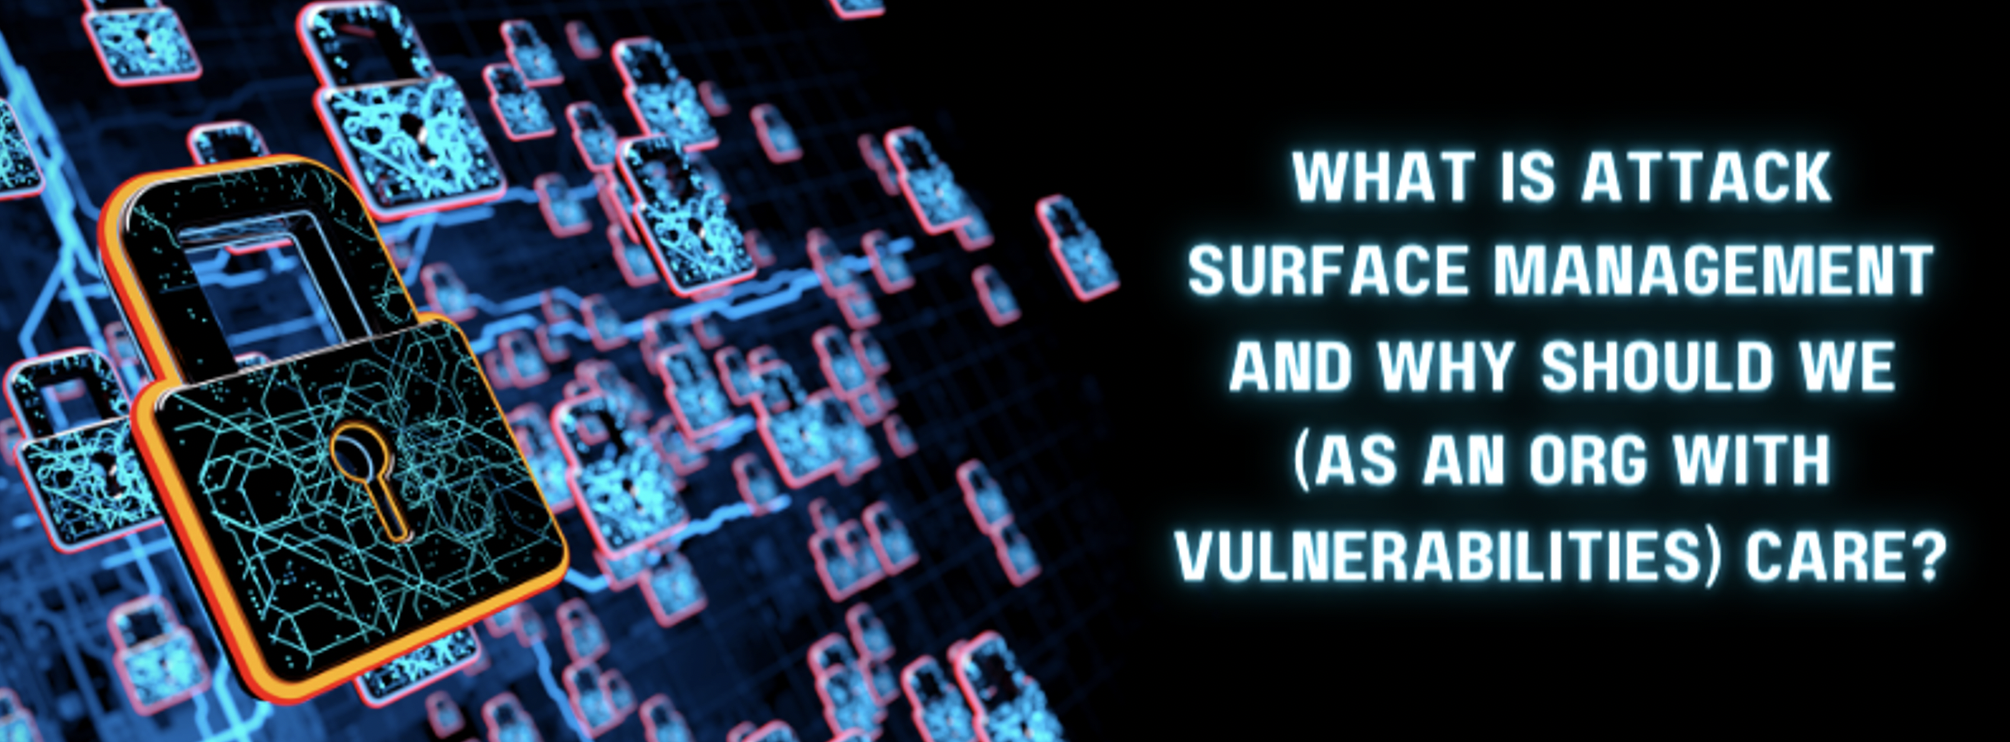 What is Attack Surface Management and Why Should We (as an Org with Vulnerabilities) Care?